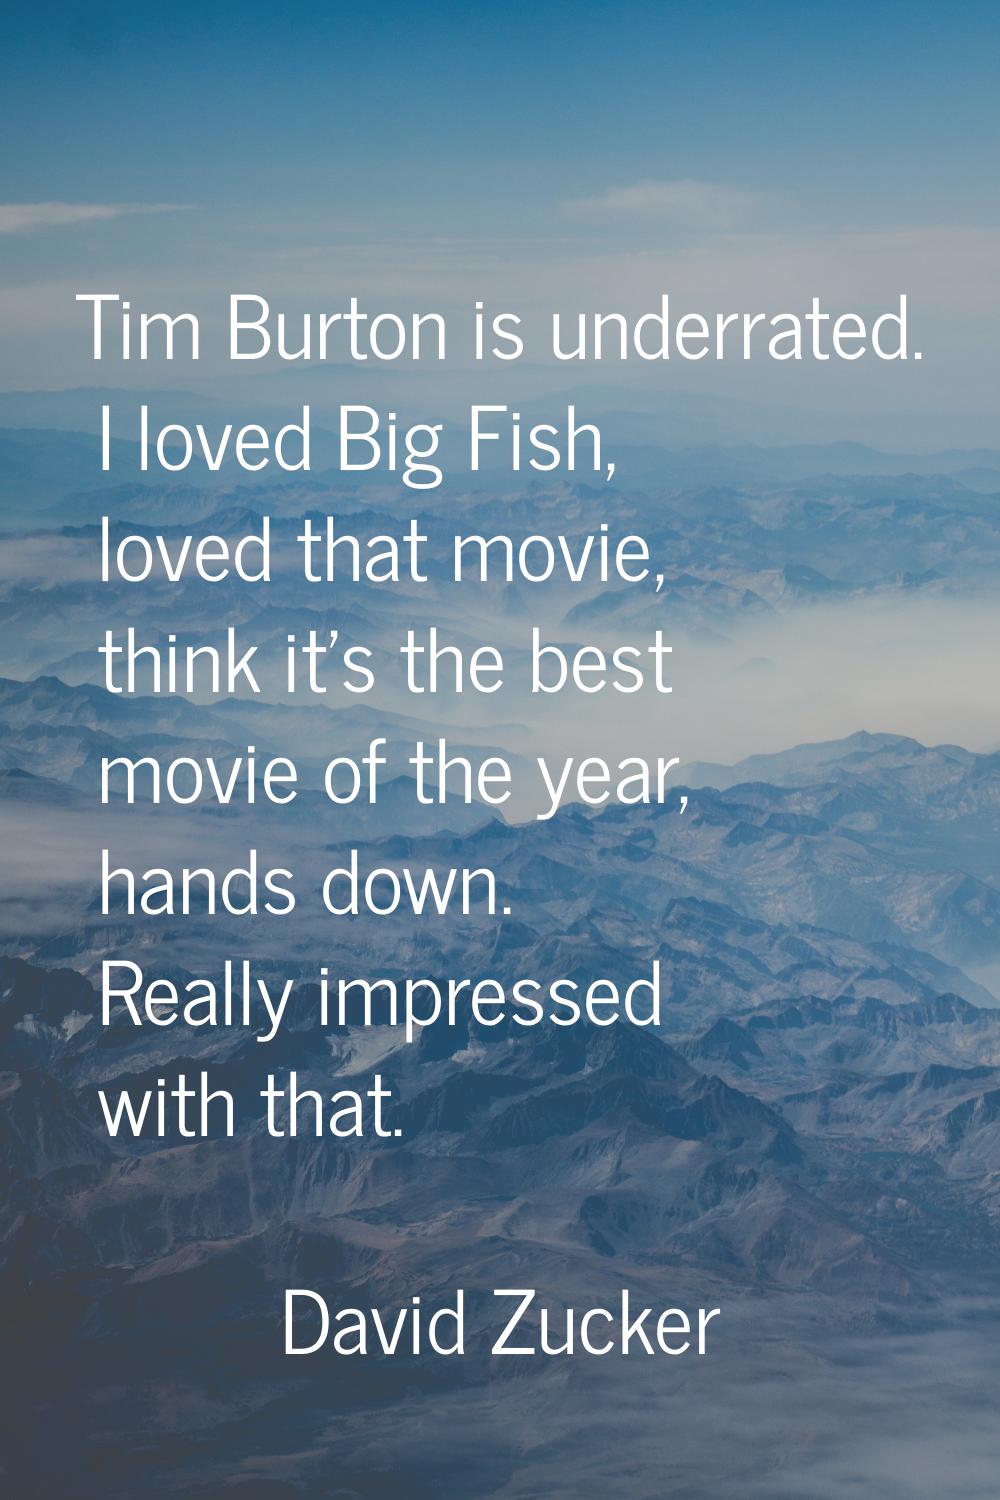 Tim Burton is underrated. I loved Big Fish, loved that movie, think it's the best movie of the year